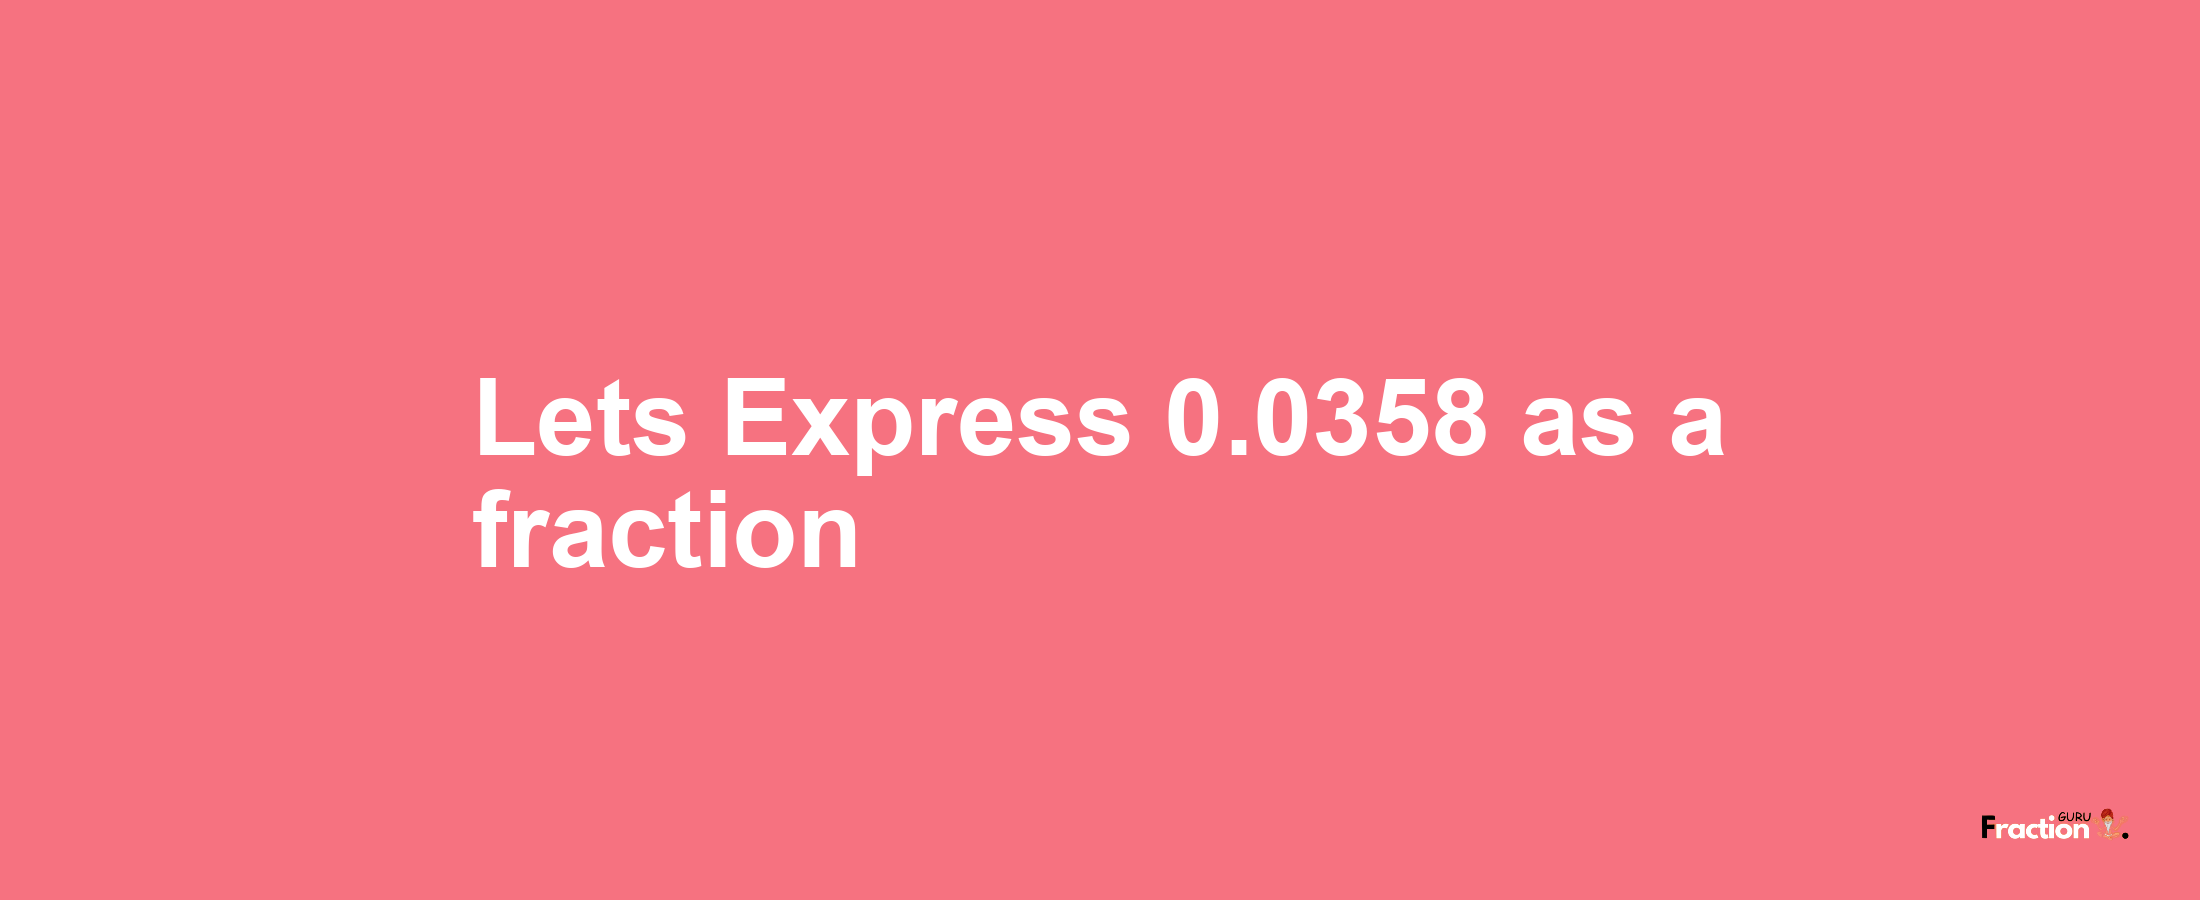 Lets Express 0.0358 as afraction